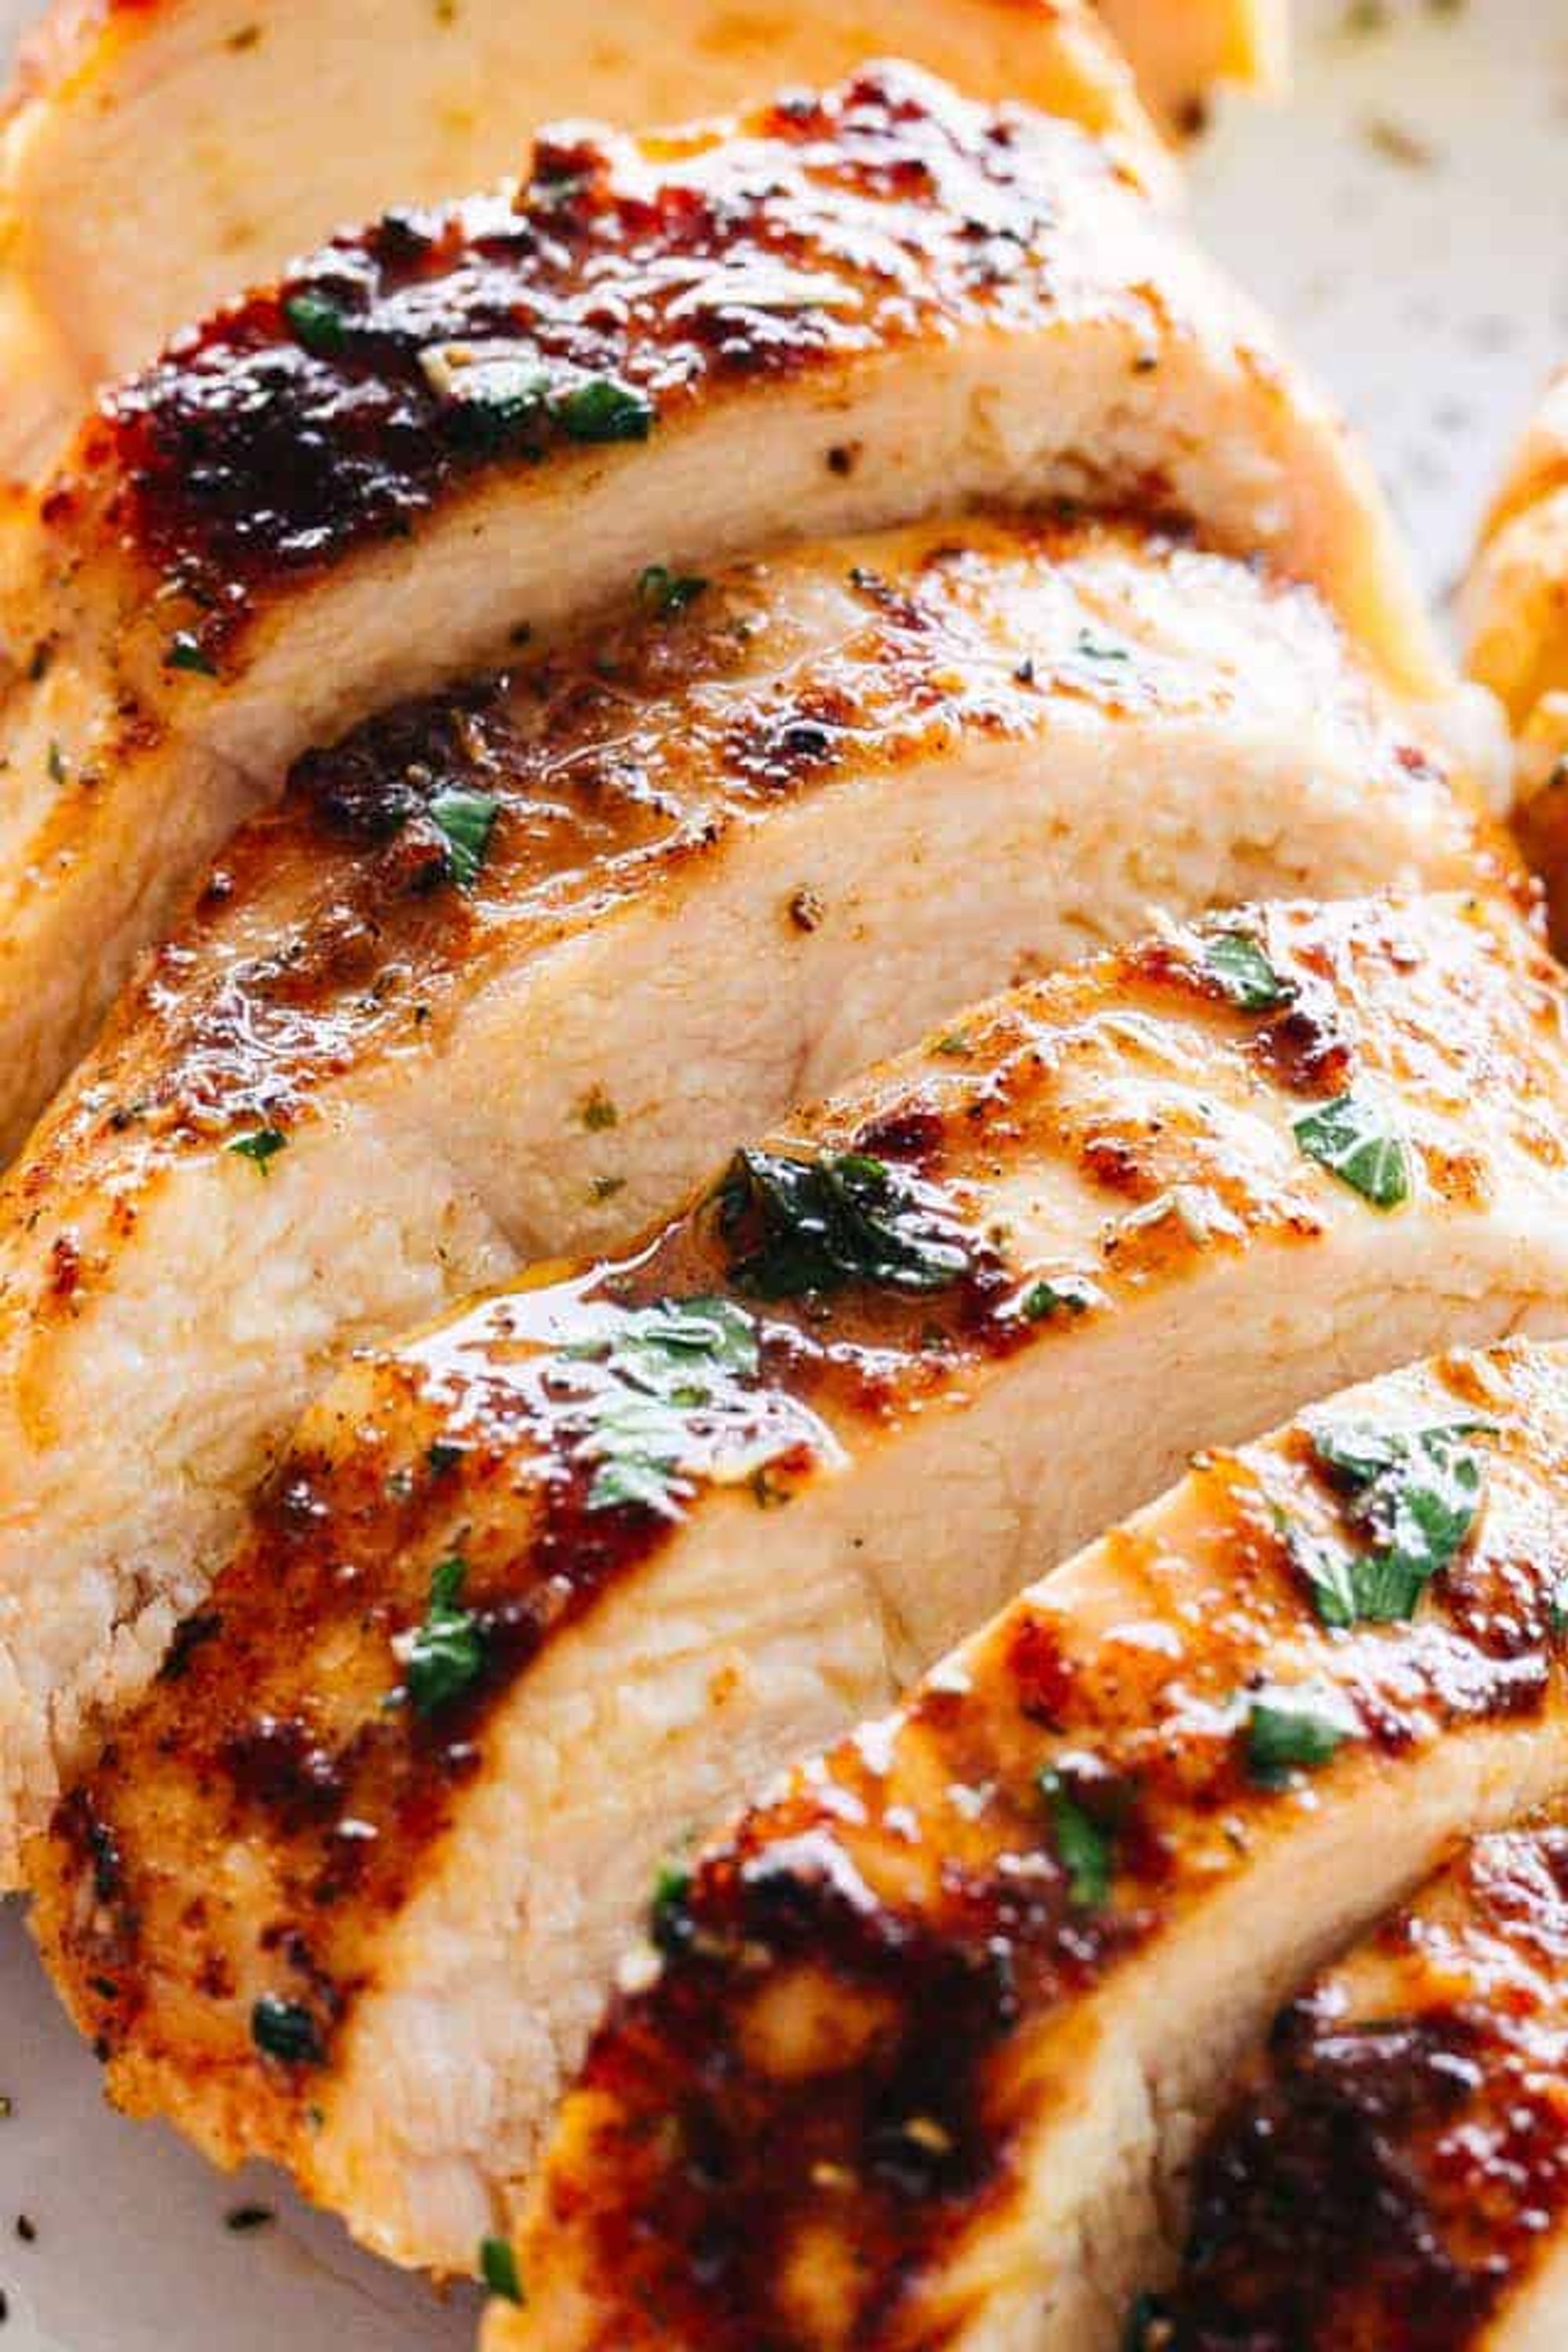 Oven Baked Chicken Breasts Recipe | How to Cook Chicken Breasts - My